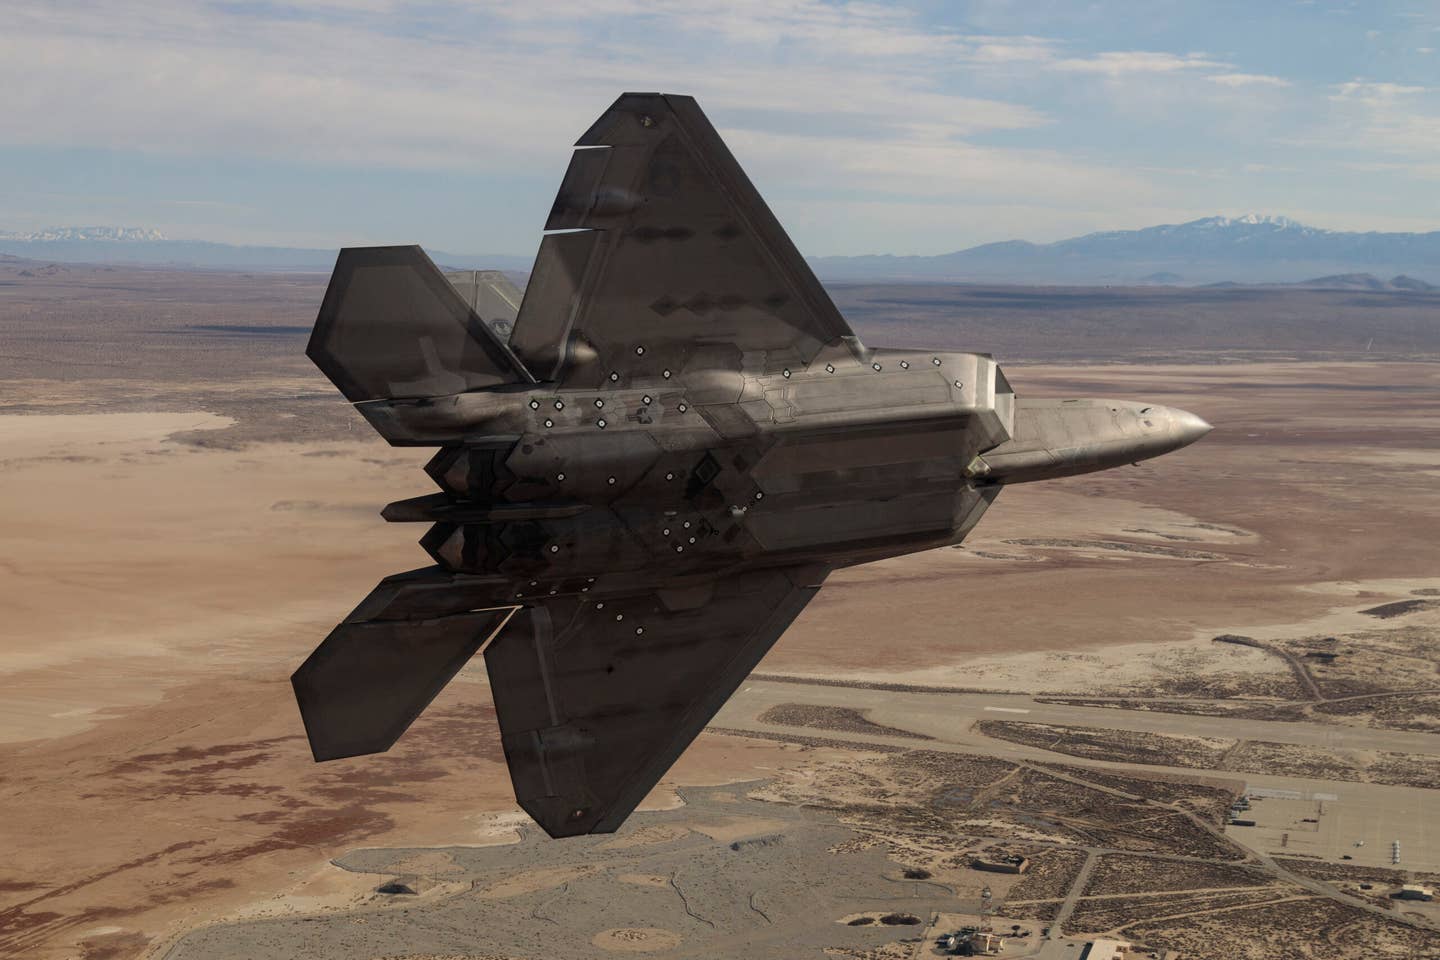 F-22 Raptors assigned to the 411th Flight Test Squadron, 412th Test Wing, out of Edwards Air Force Base, California, conduct a test sortie over the Pacific Ocean. <em>Photo courtesy of Kyle Larson/Lockheed Martin</em>